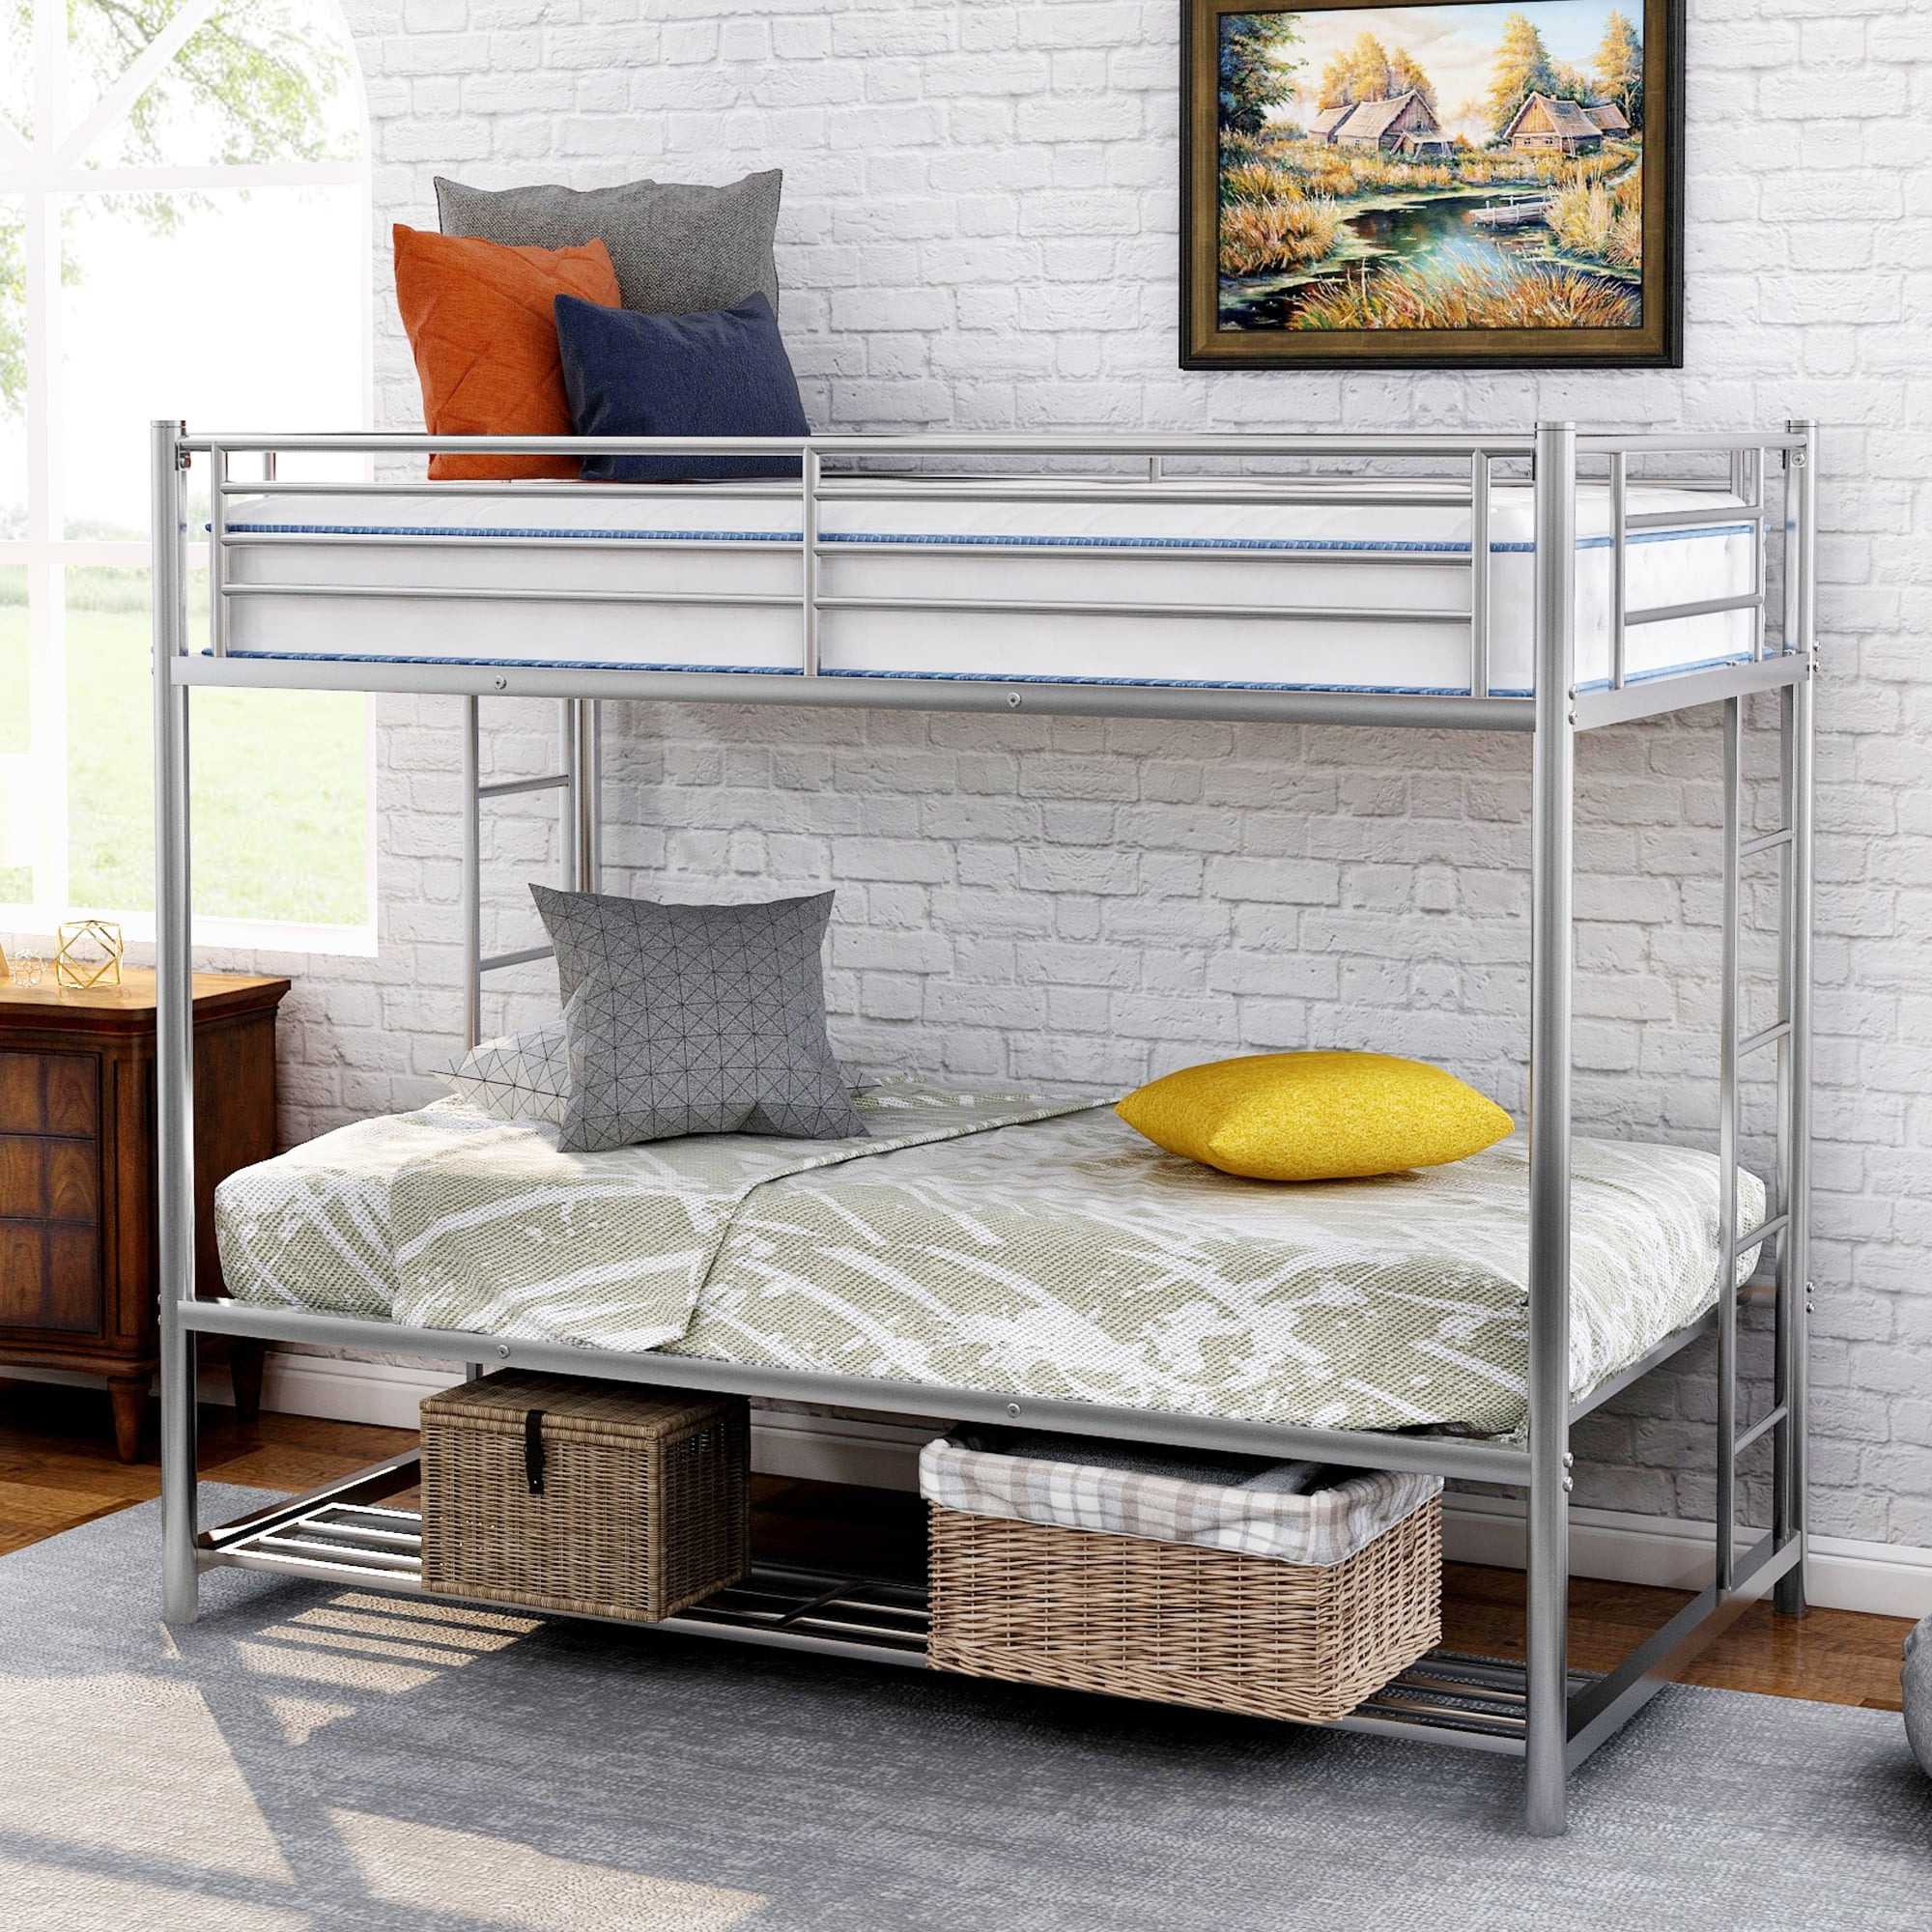 Modern Bunk Beds For Kids And Teens, Apartment Size Bunk Beds